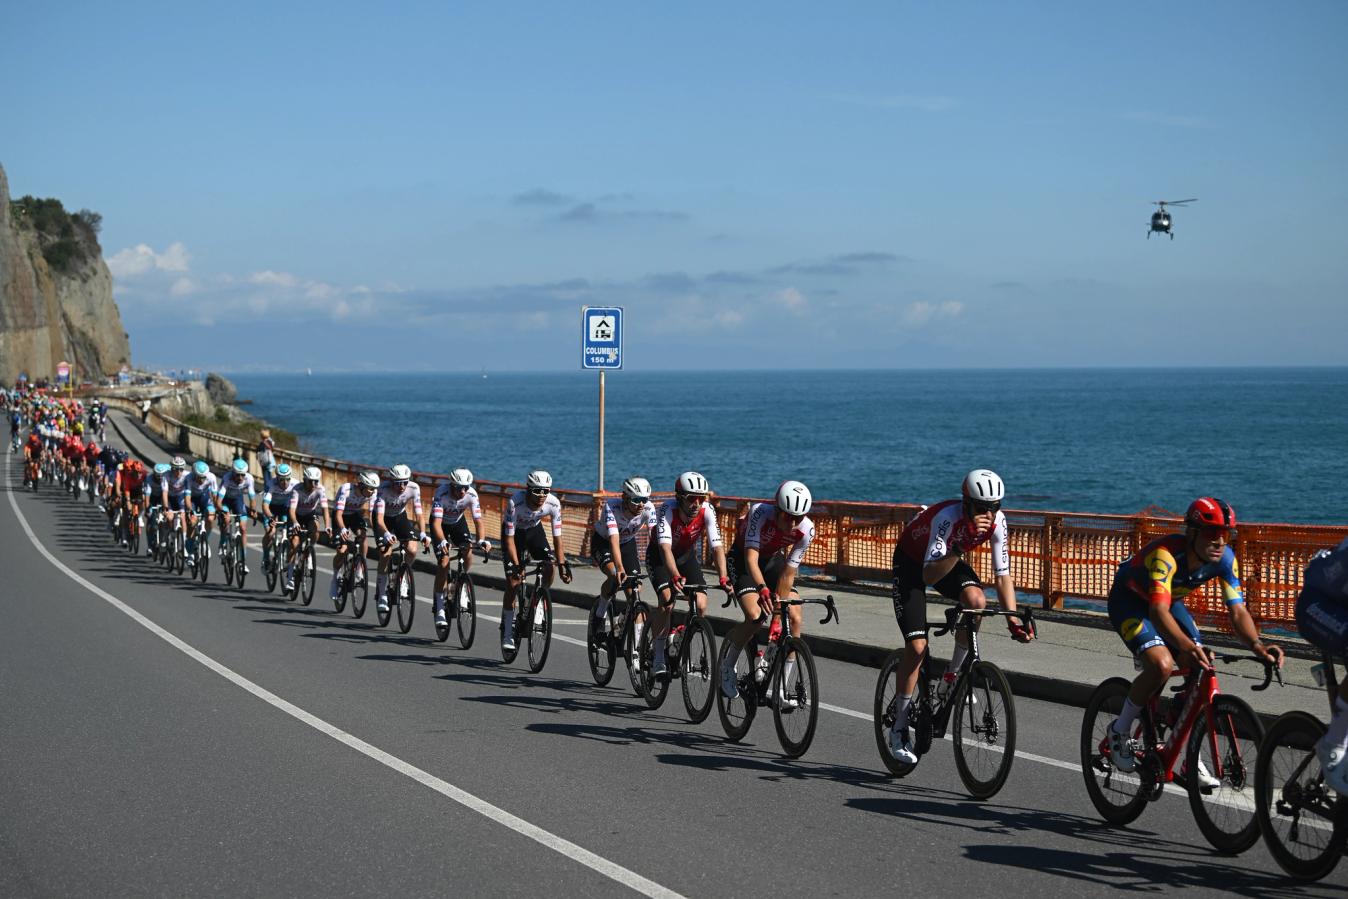 The peloton strings out on the coast road